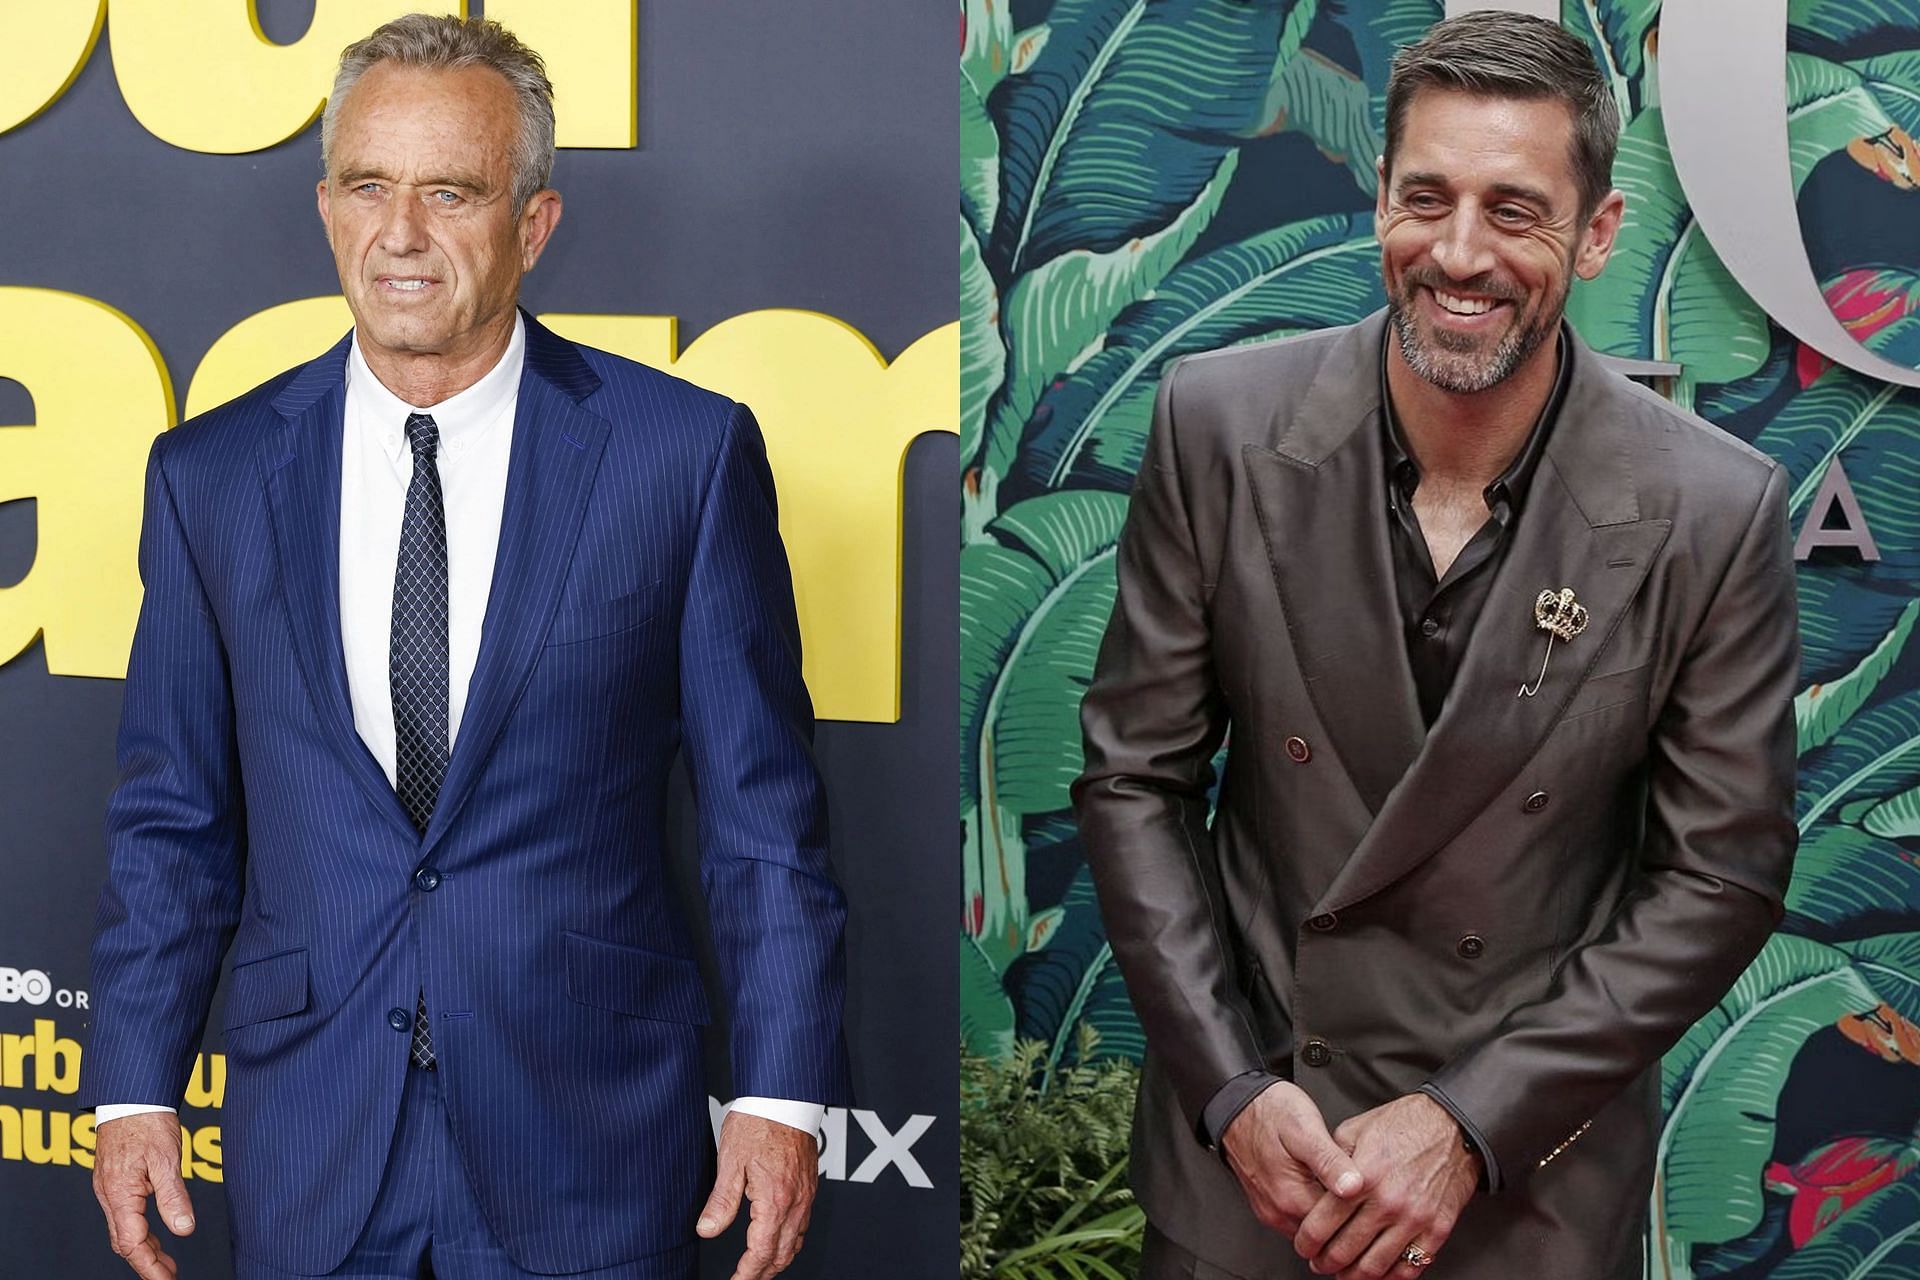 Aaron Rodgers as U.S. Vice President? RFK Jr. reaches out to Jets QB for presidential campaign